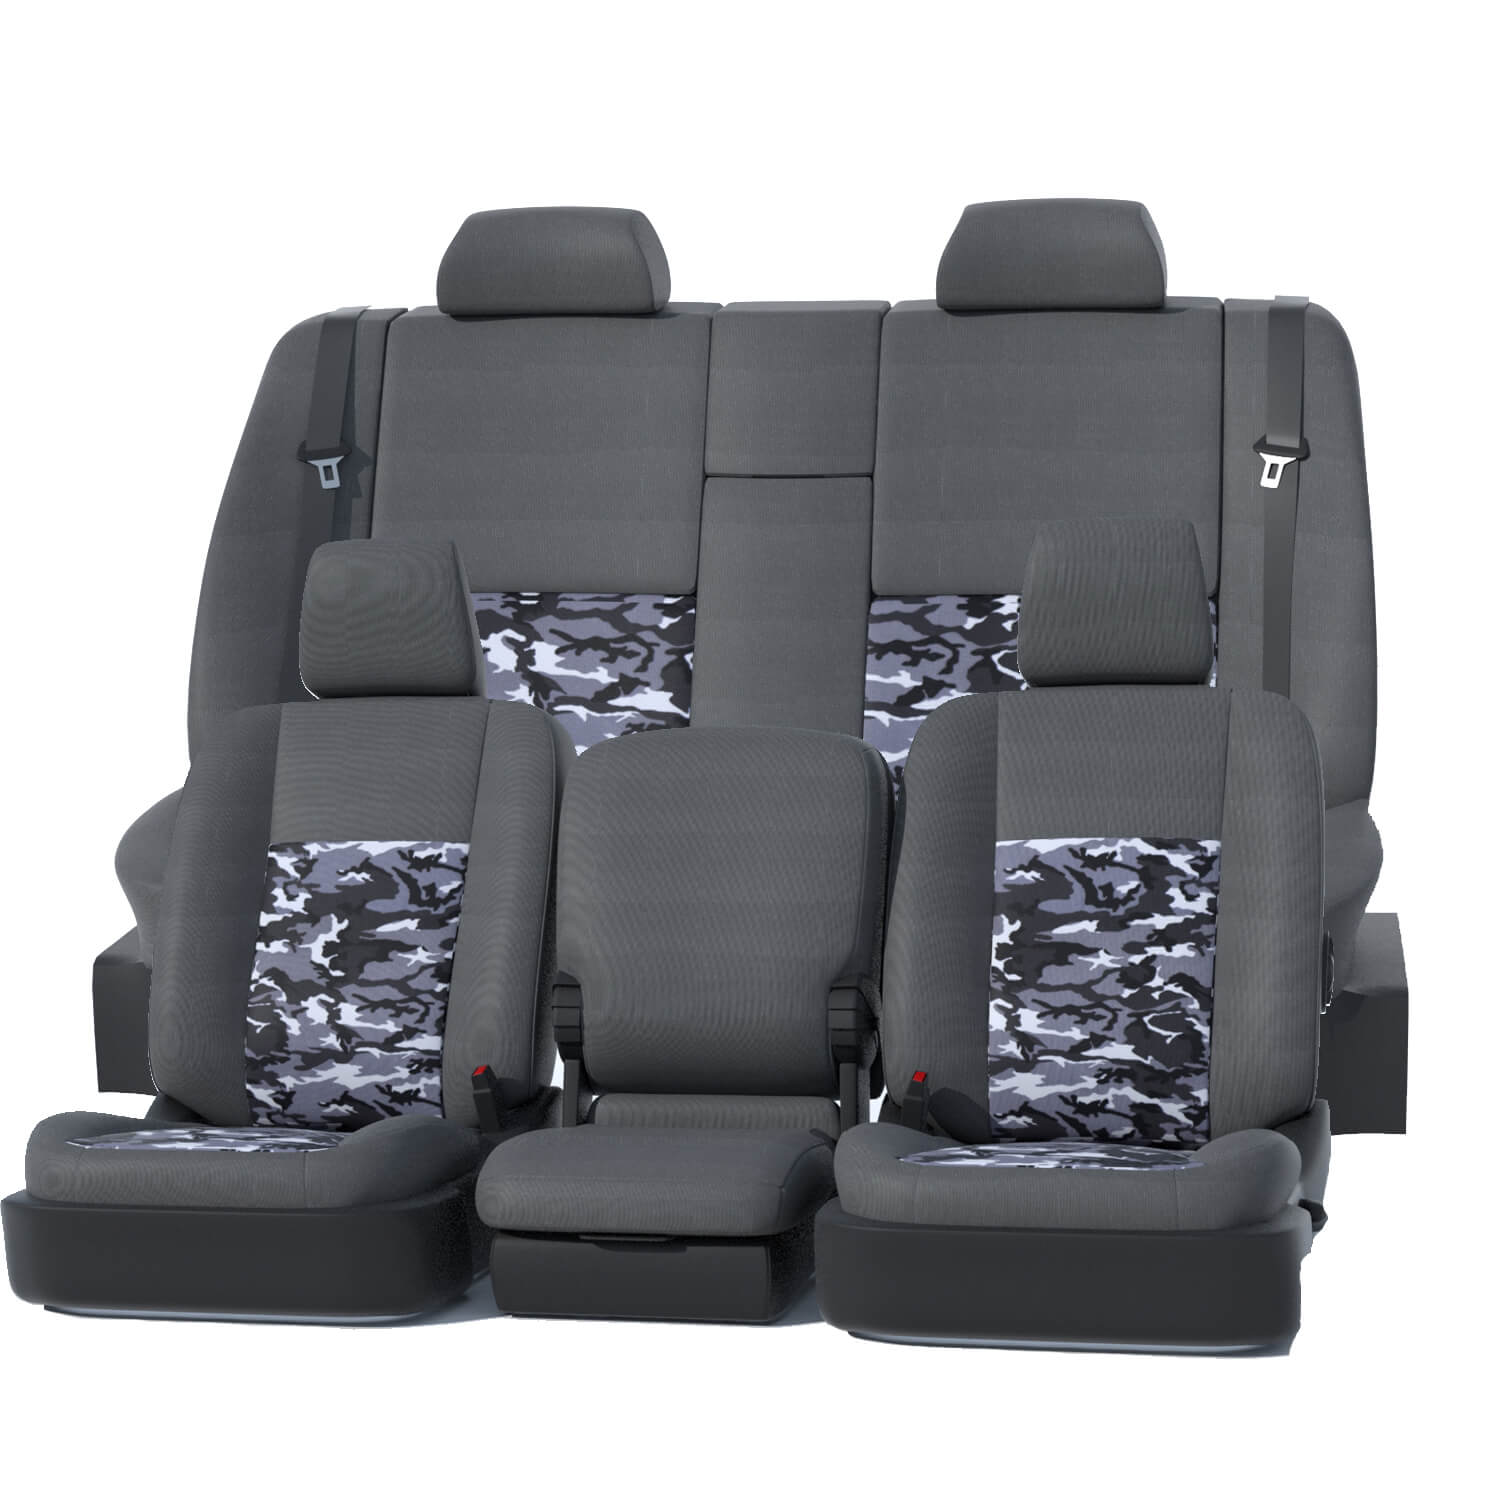 Rugged highly water-resistant seat covers that hunters and fishermen need. Our camouflage seat covers are available in a variety of camo prints that deliver incredible realism from a tactical look to a bold lifestyle look. Our seat covers don't just offer a stunning camo look, but the rugged performance you need paired with a custom-fit tailored to your exact seats. Each cover is made from a tightly woven nylon for heavy-duty protection and specially treated to repel moisture and spills. We also add a foam backing to your covers to make sure that after a long day outdoors you have a comfortable ride back home.